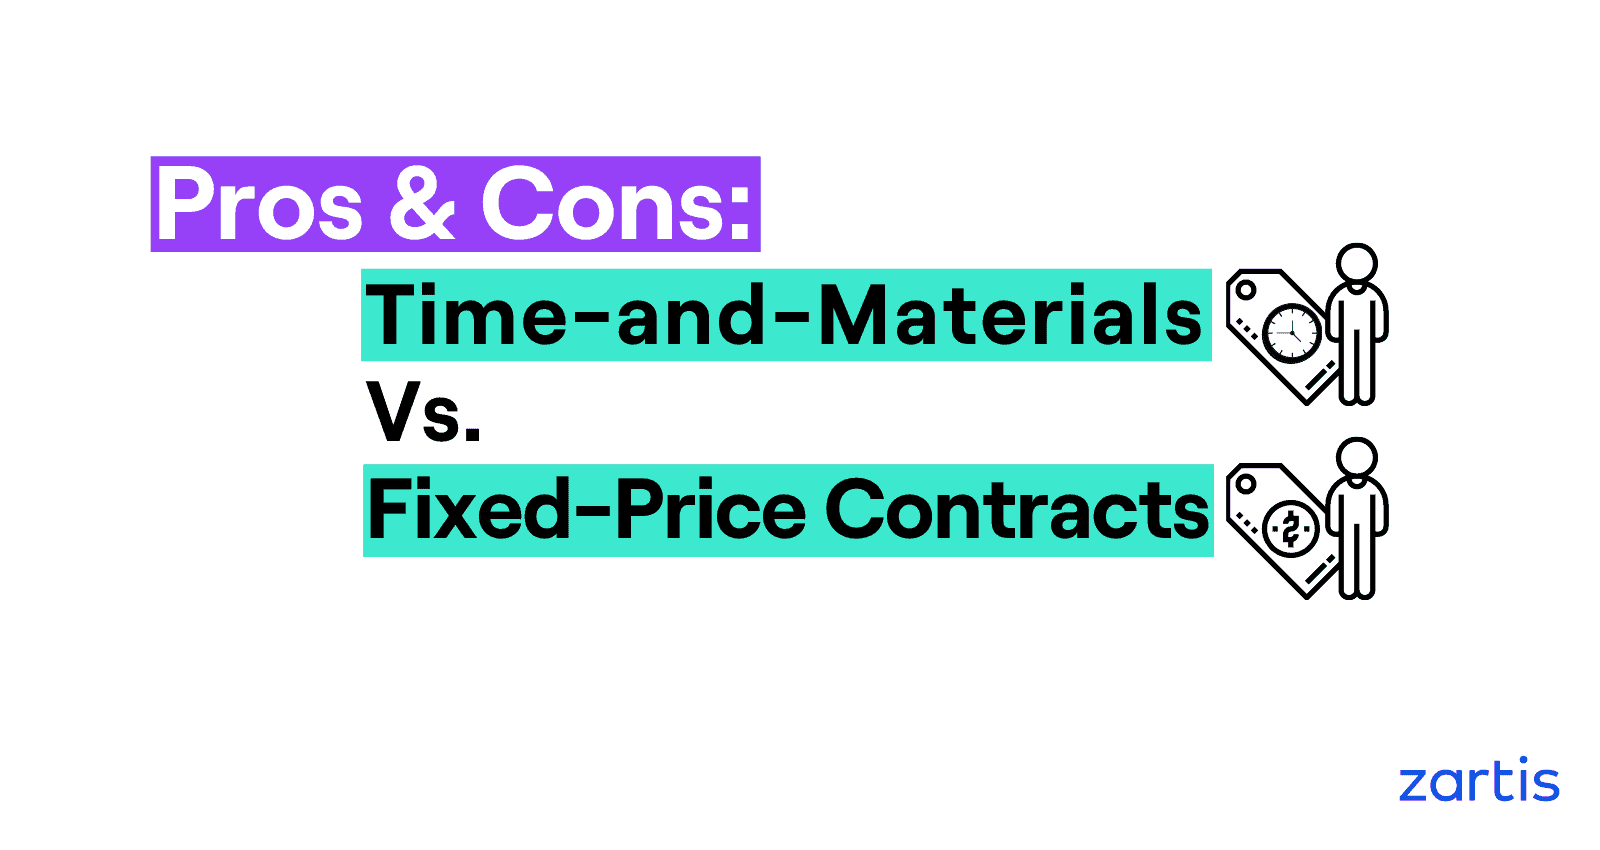 Fixed-Price vs Time-and-Materials Contracts Compared